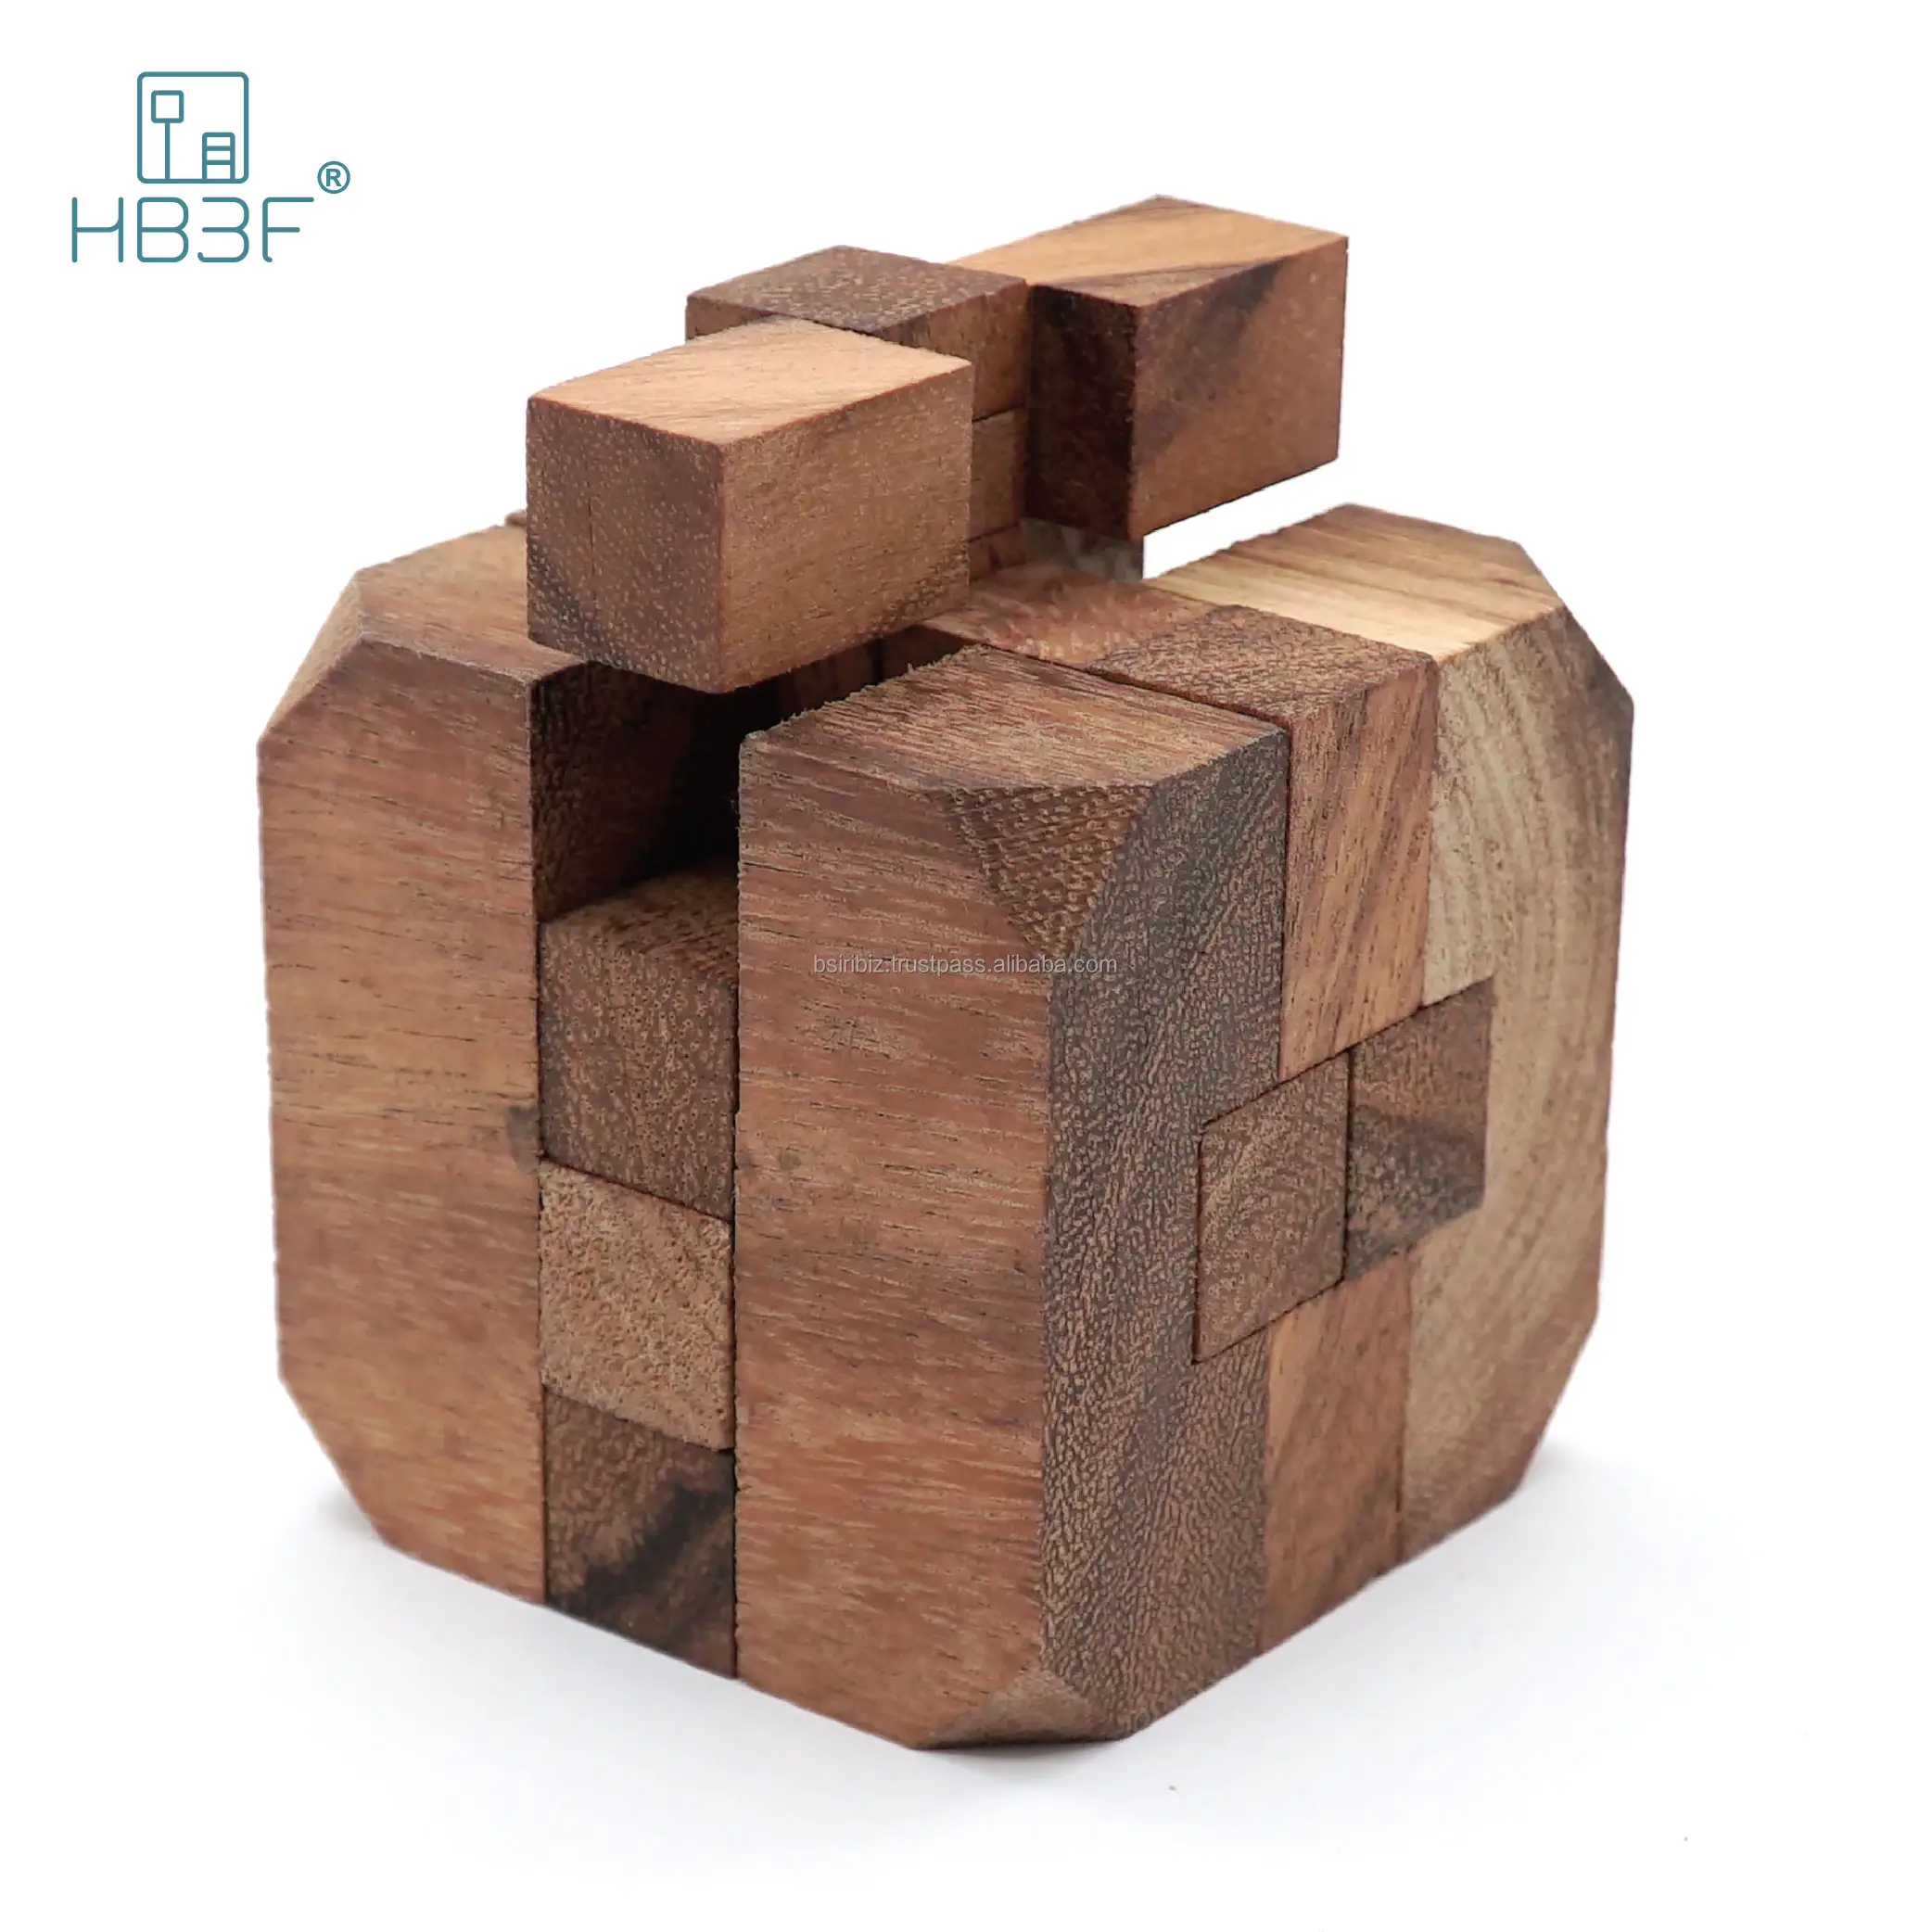 Diamond Cube Wooden Jigsaw Puzzles 3D Puzzle Game Educational Toys for Kids Magic Cubes Learning Games Wood Brain Teaser